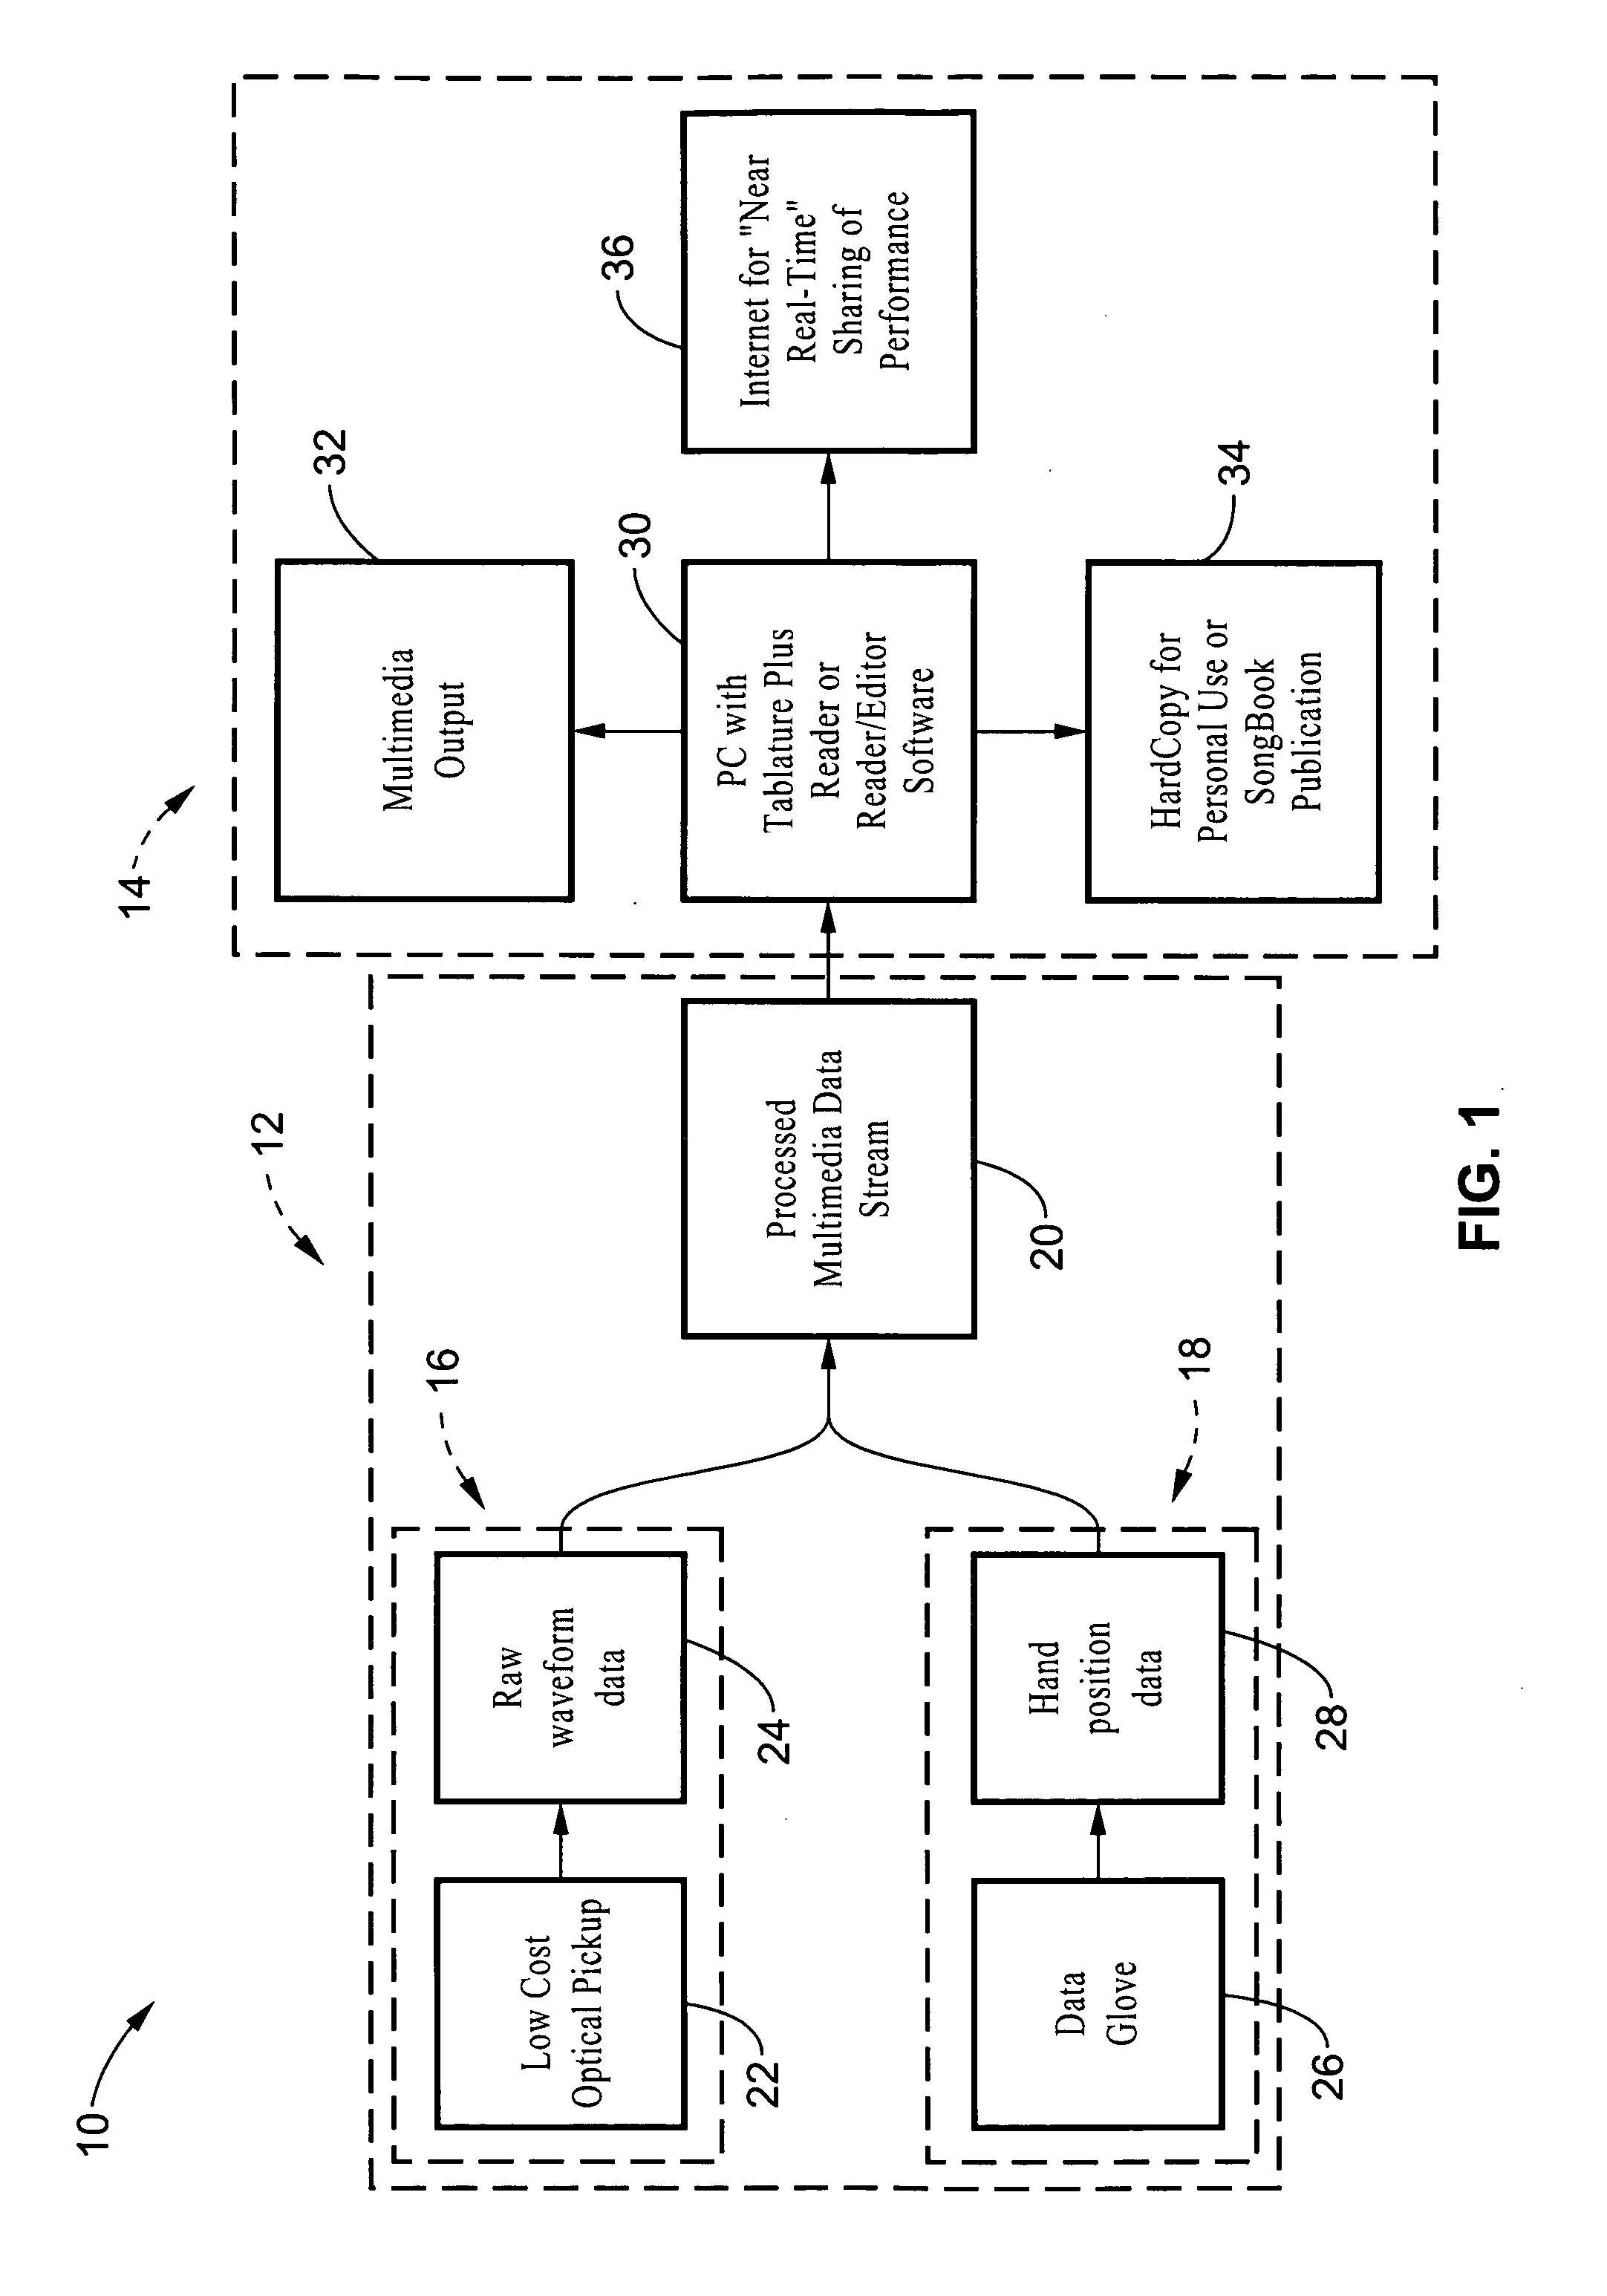 Method and apparatus for sensing and displaying tablature associated with a stringed musical instrument